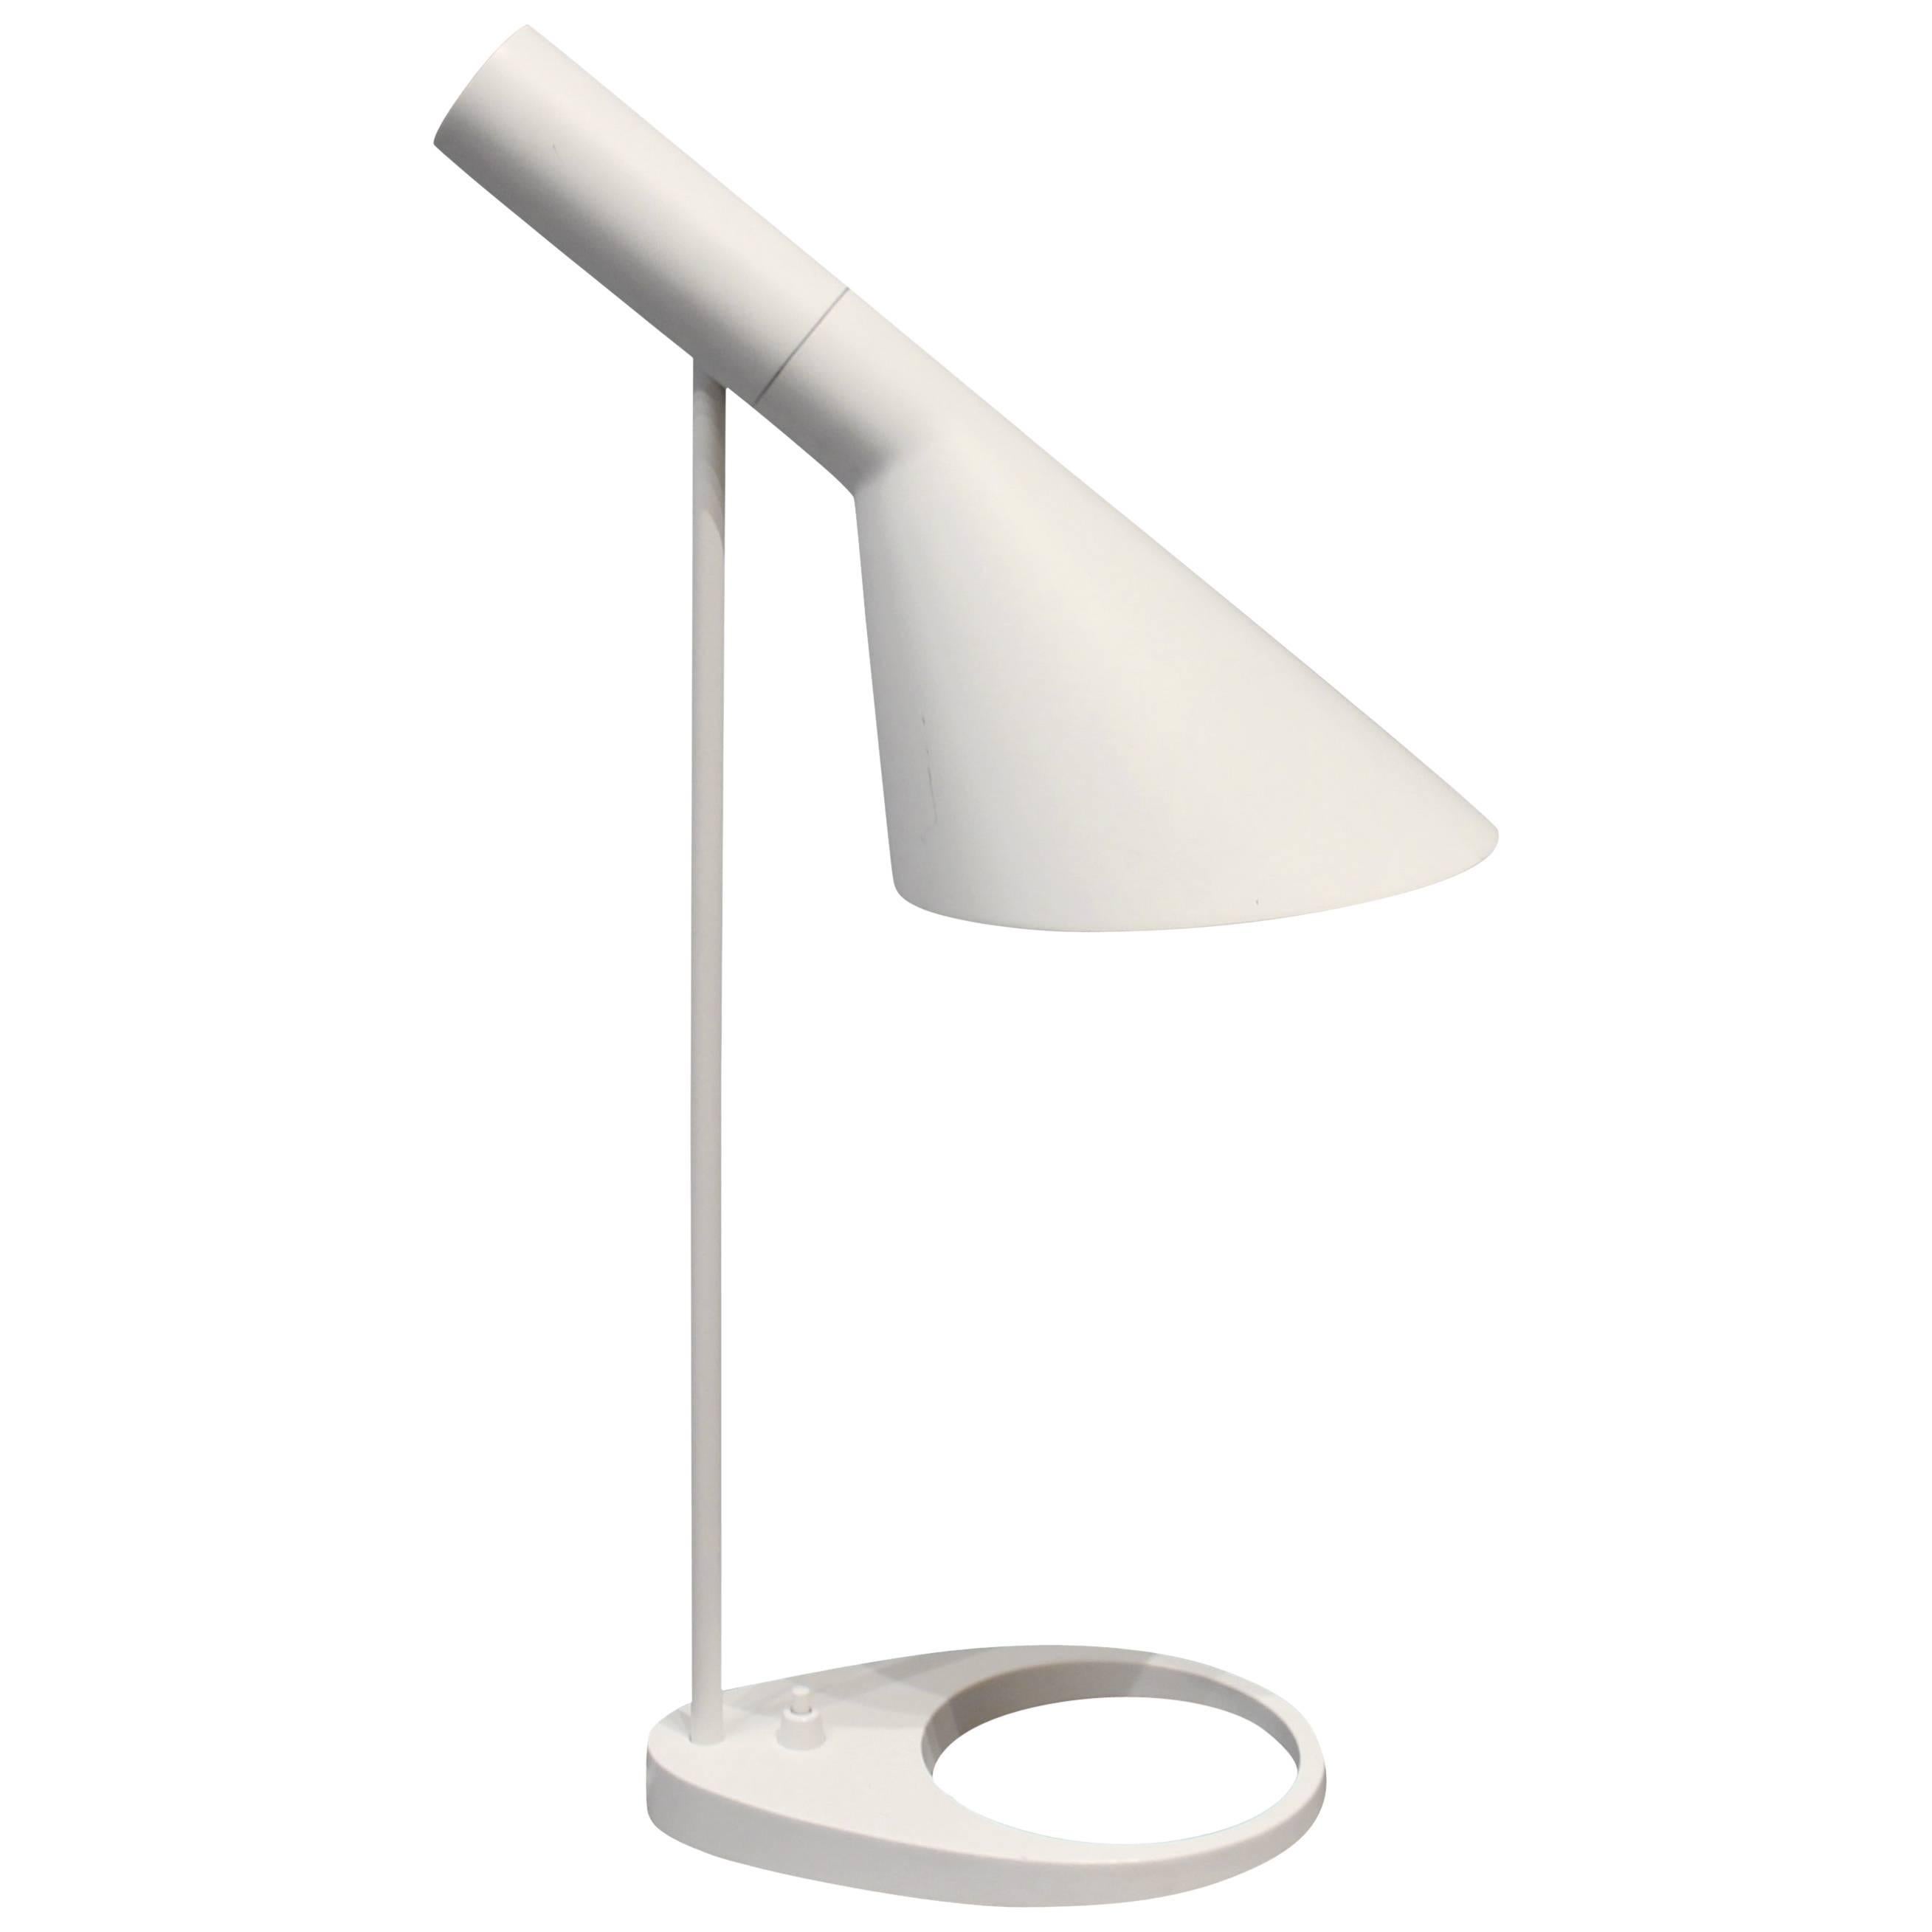 Arne Jacobsen, White Table Lamp, Designed in 1960 and by Louis Poulsen